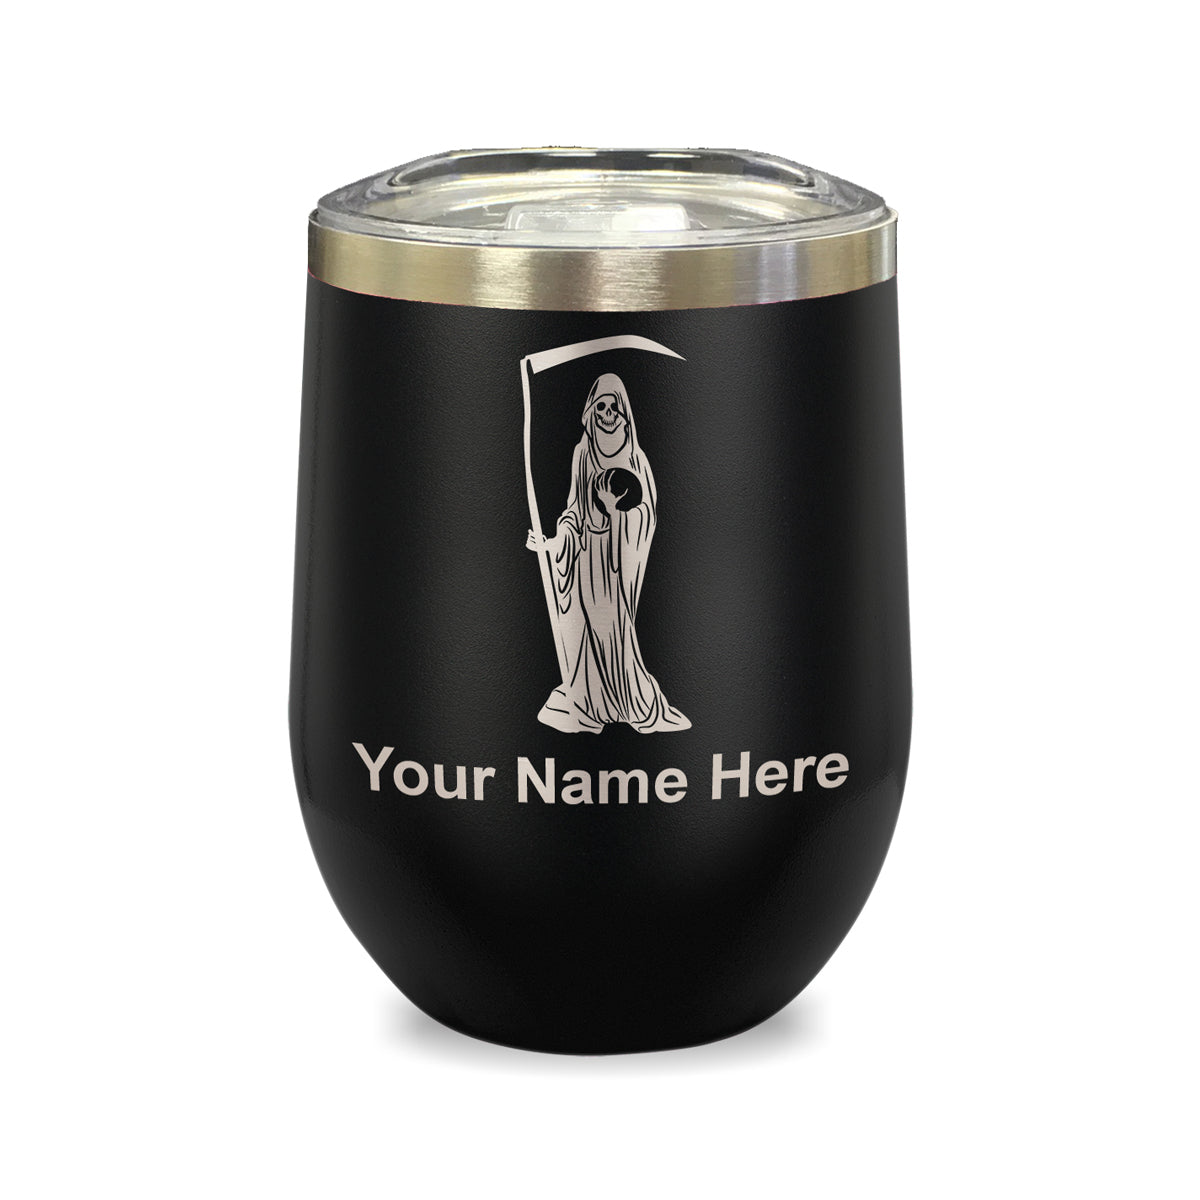 LaserGram Double Wall Stainless Steel Wine Glass, Santa Muerte, Personalized Engraving Included